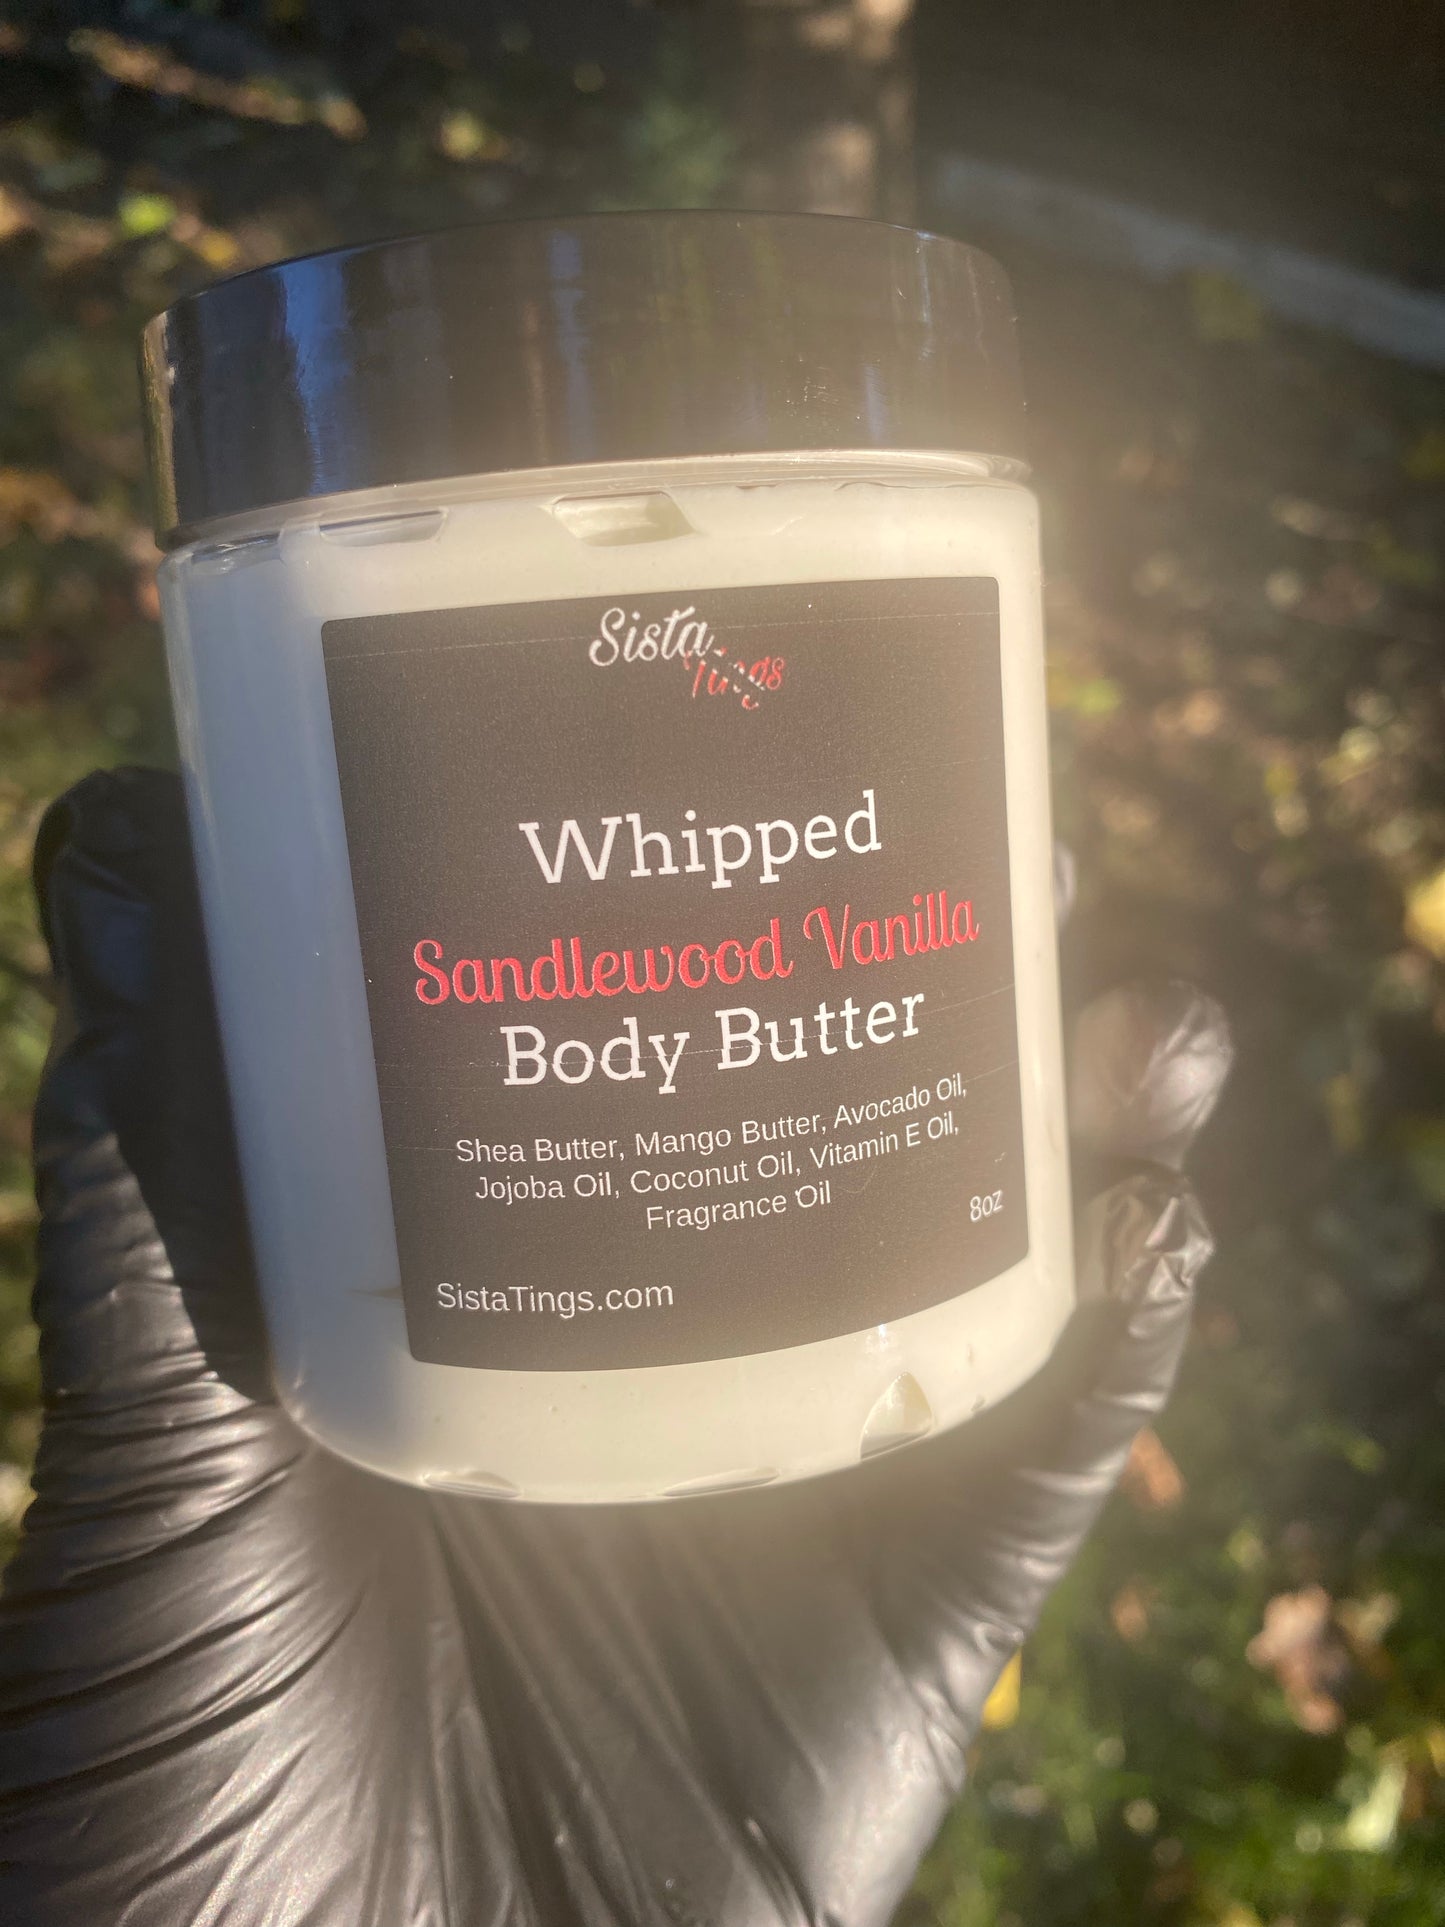 Whipped Sandlewood Vanilla Body Butter